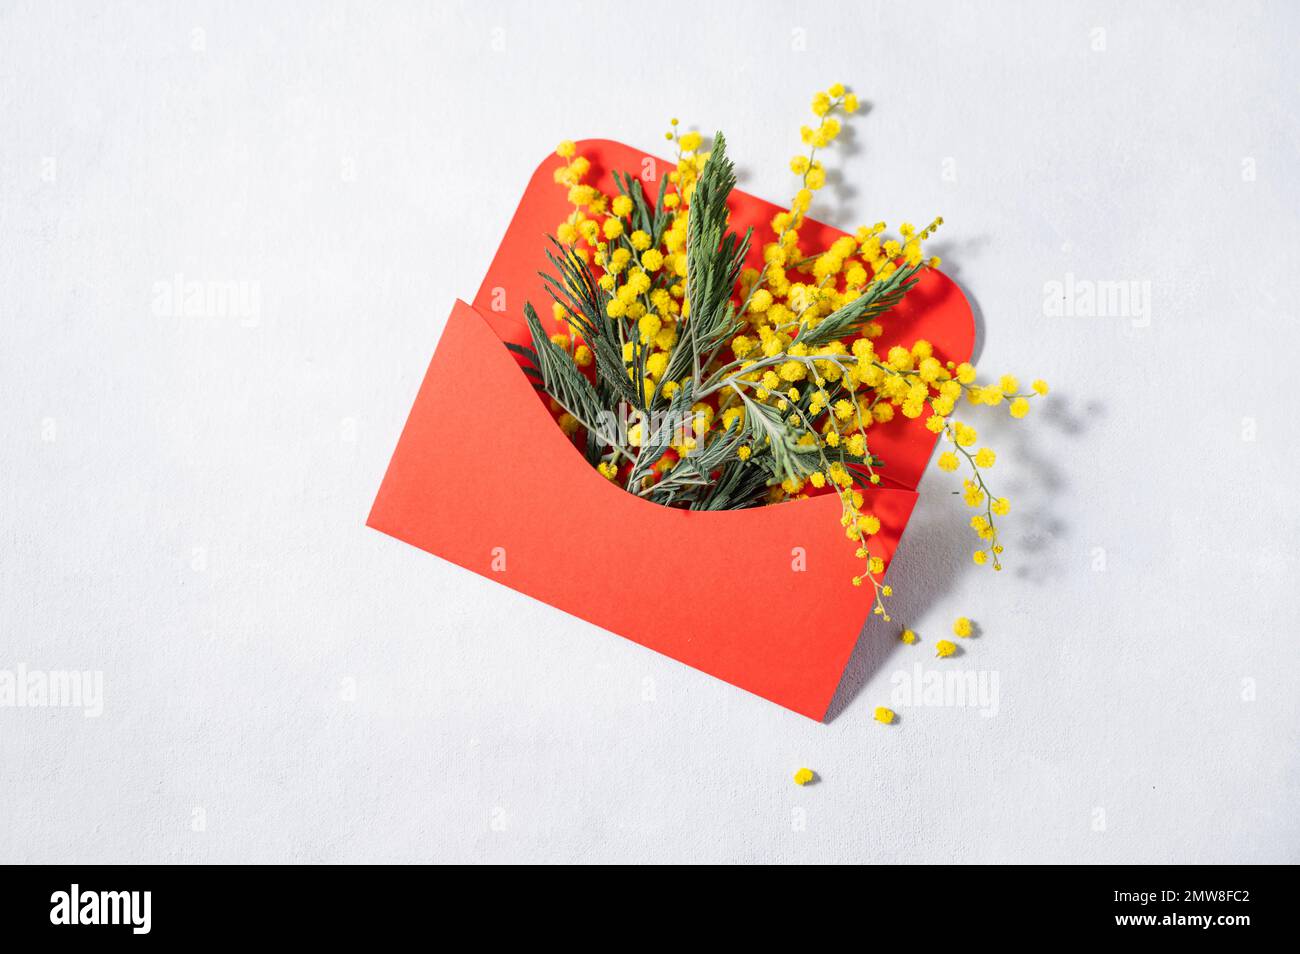 A branch of yellow mimosa flowers in a red envelope on a light background. Concept of 8 March, happy women's day. Top view and space for text. Stock Photo